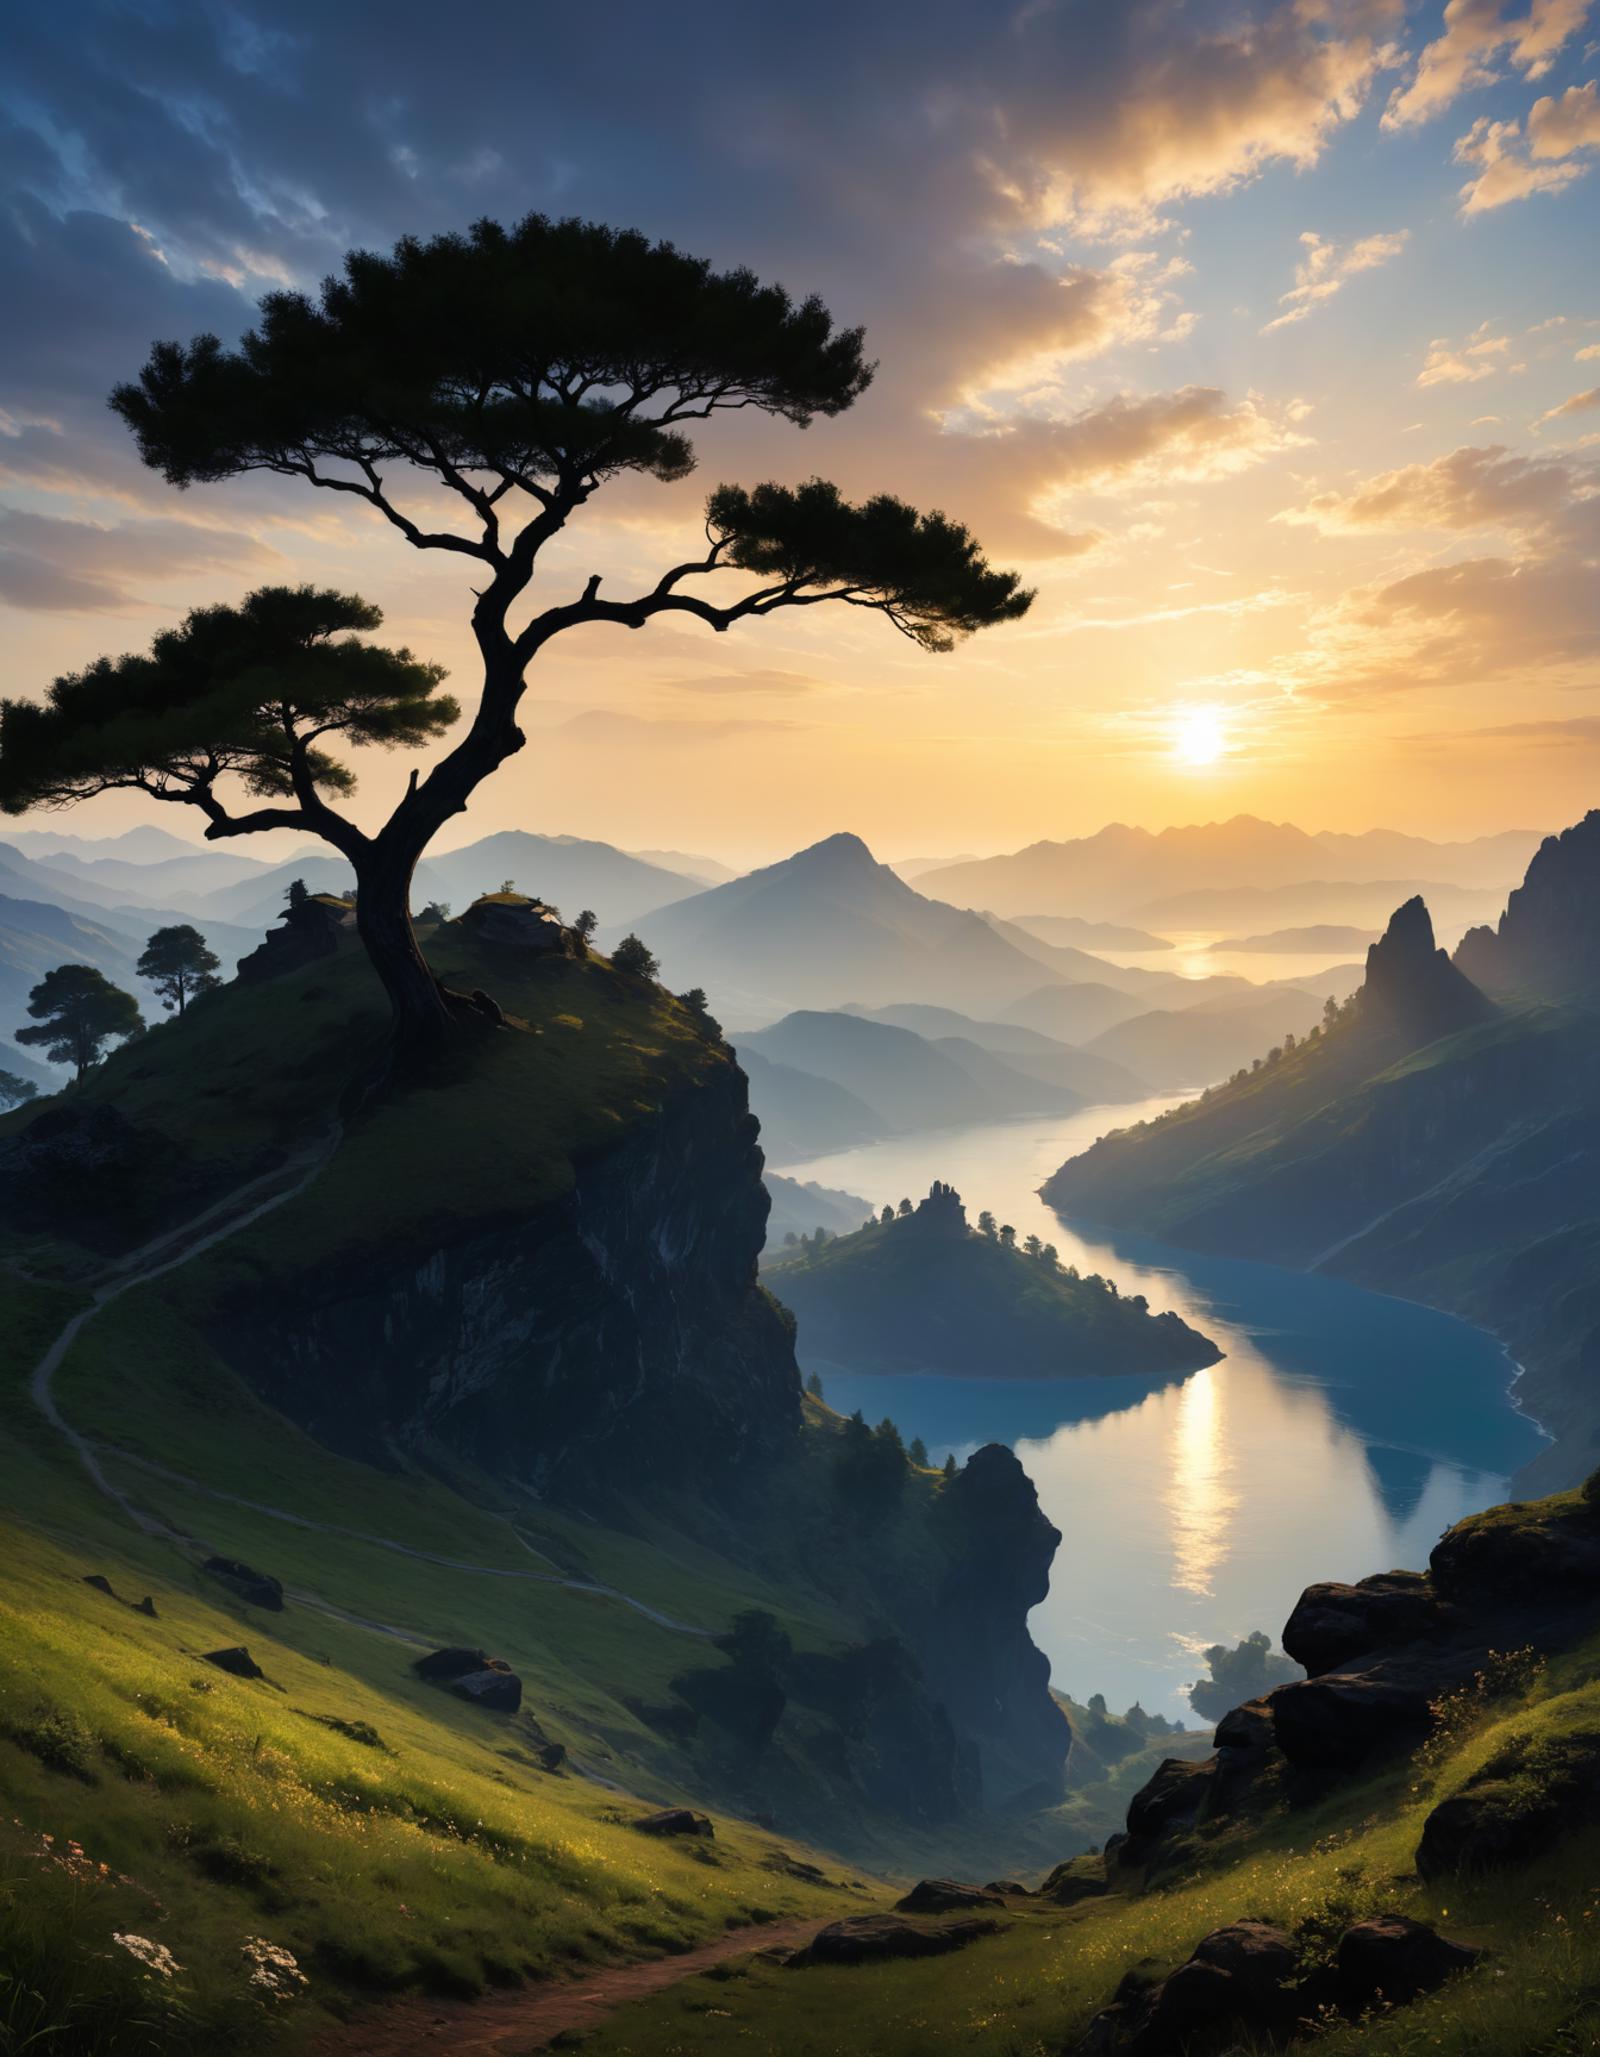 Beautiful Scenic Mountain View with Lake and Trees at Sunset